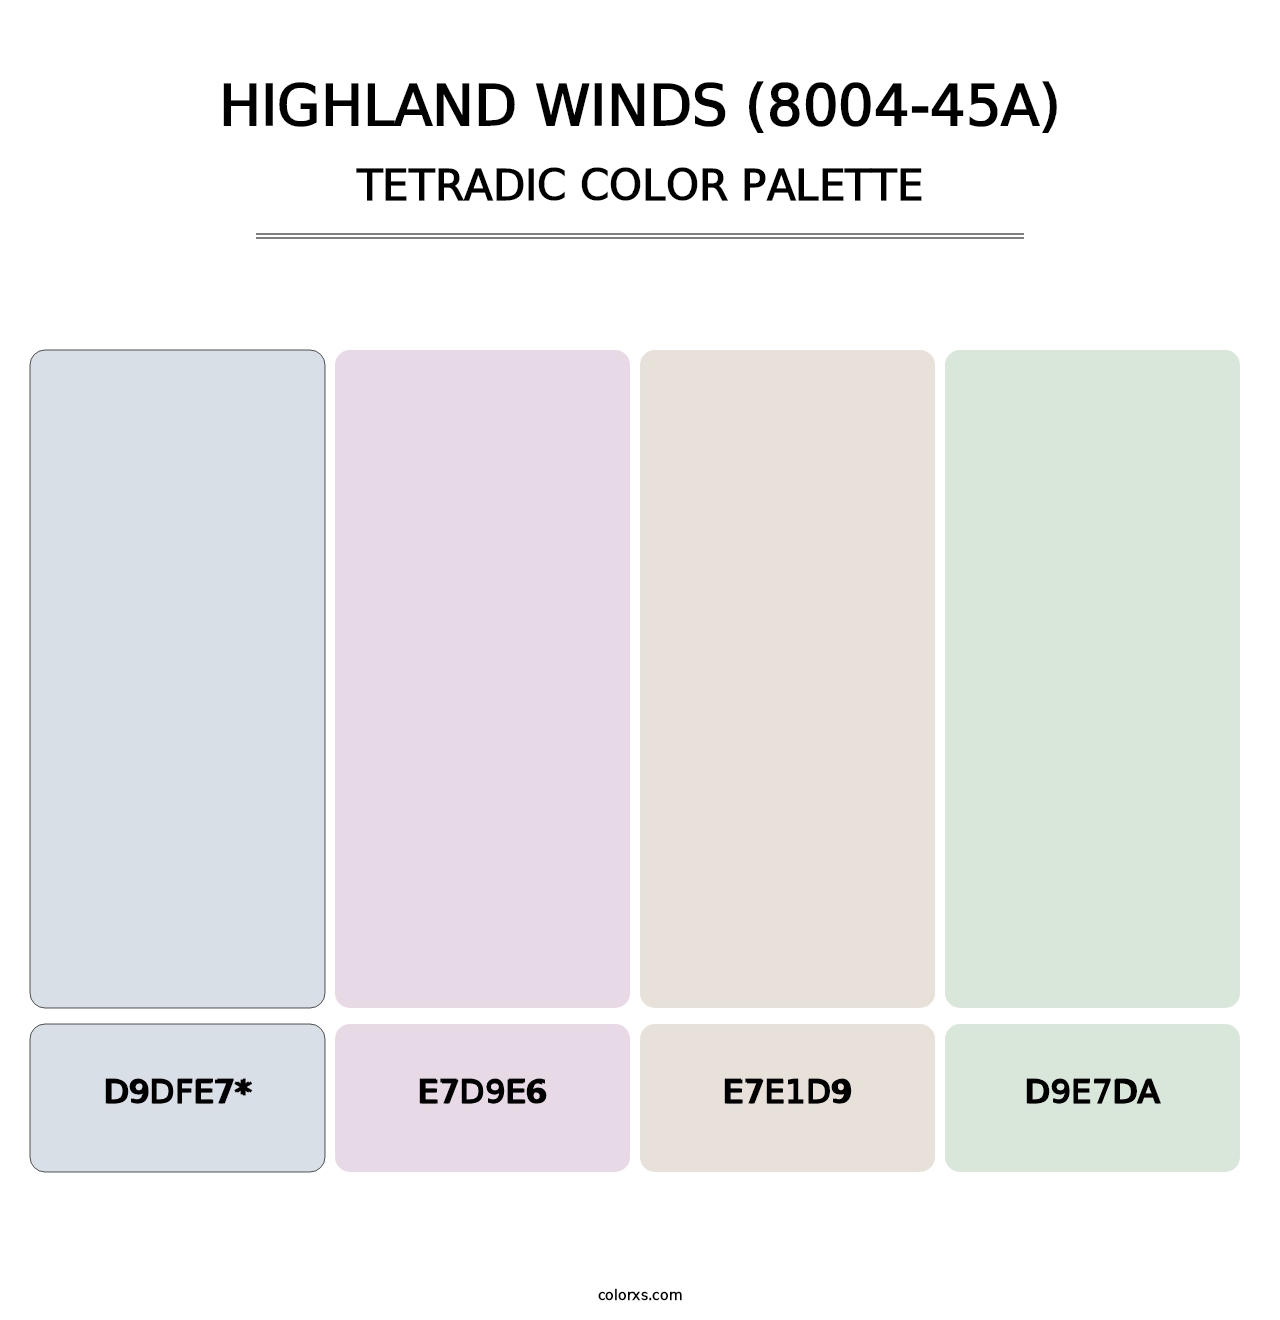 Highland Winds (8004-45A) - Tetradic Color Palette